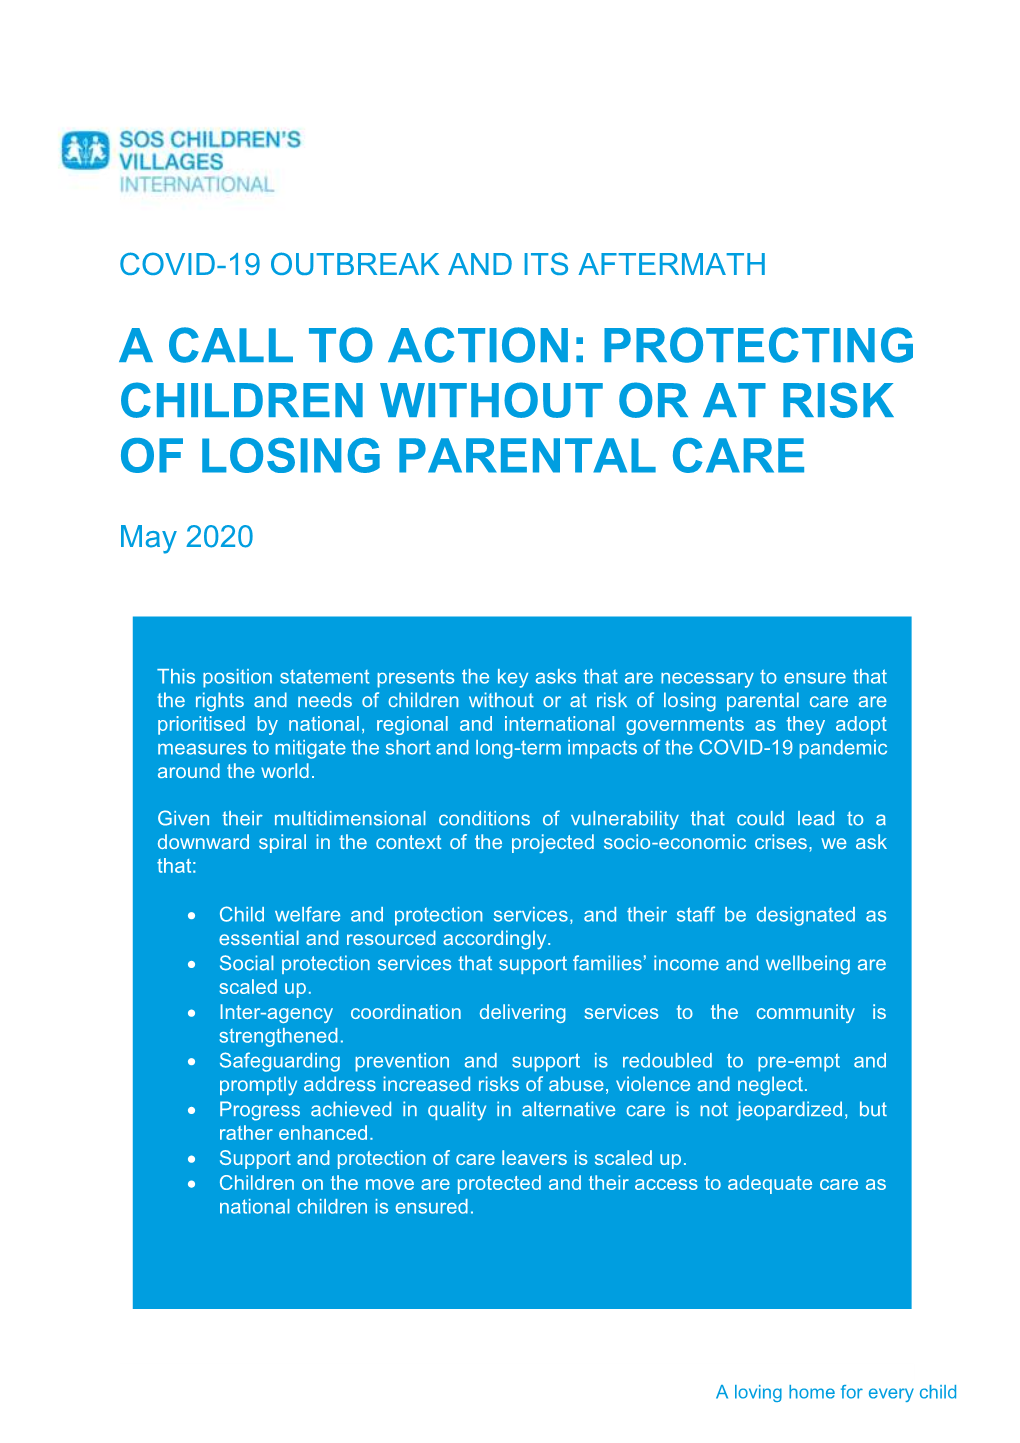 Protecting Children Without Or at Risk of Losing Parental Care